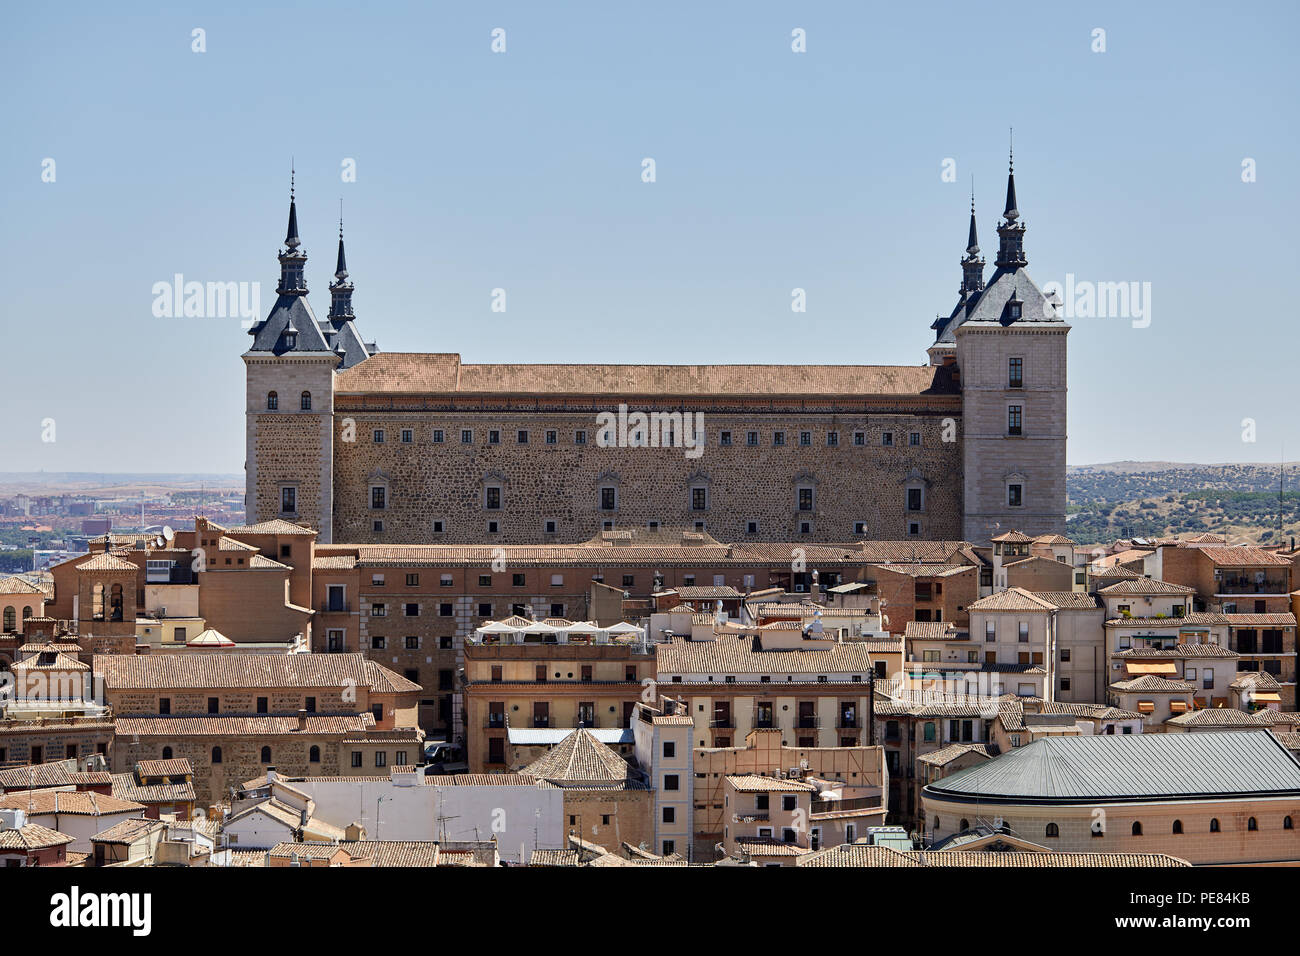 Toledo, Spain: The Alcázar, surrounded by houses and other buildings, in the historic Spanish city of Toledo. Stock Photo